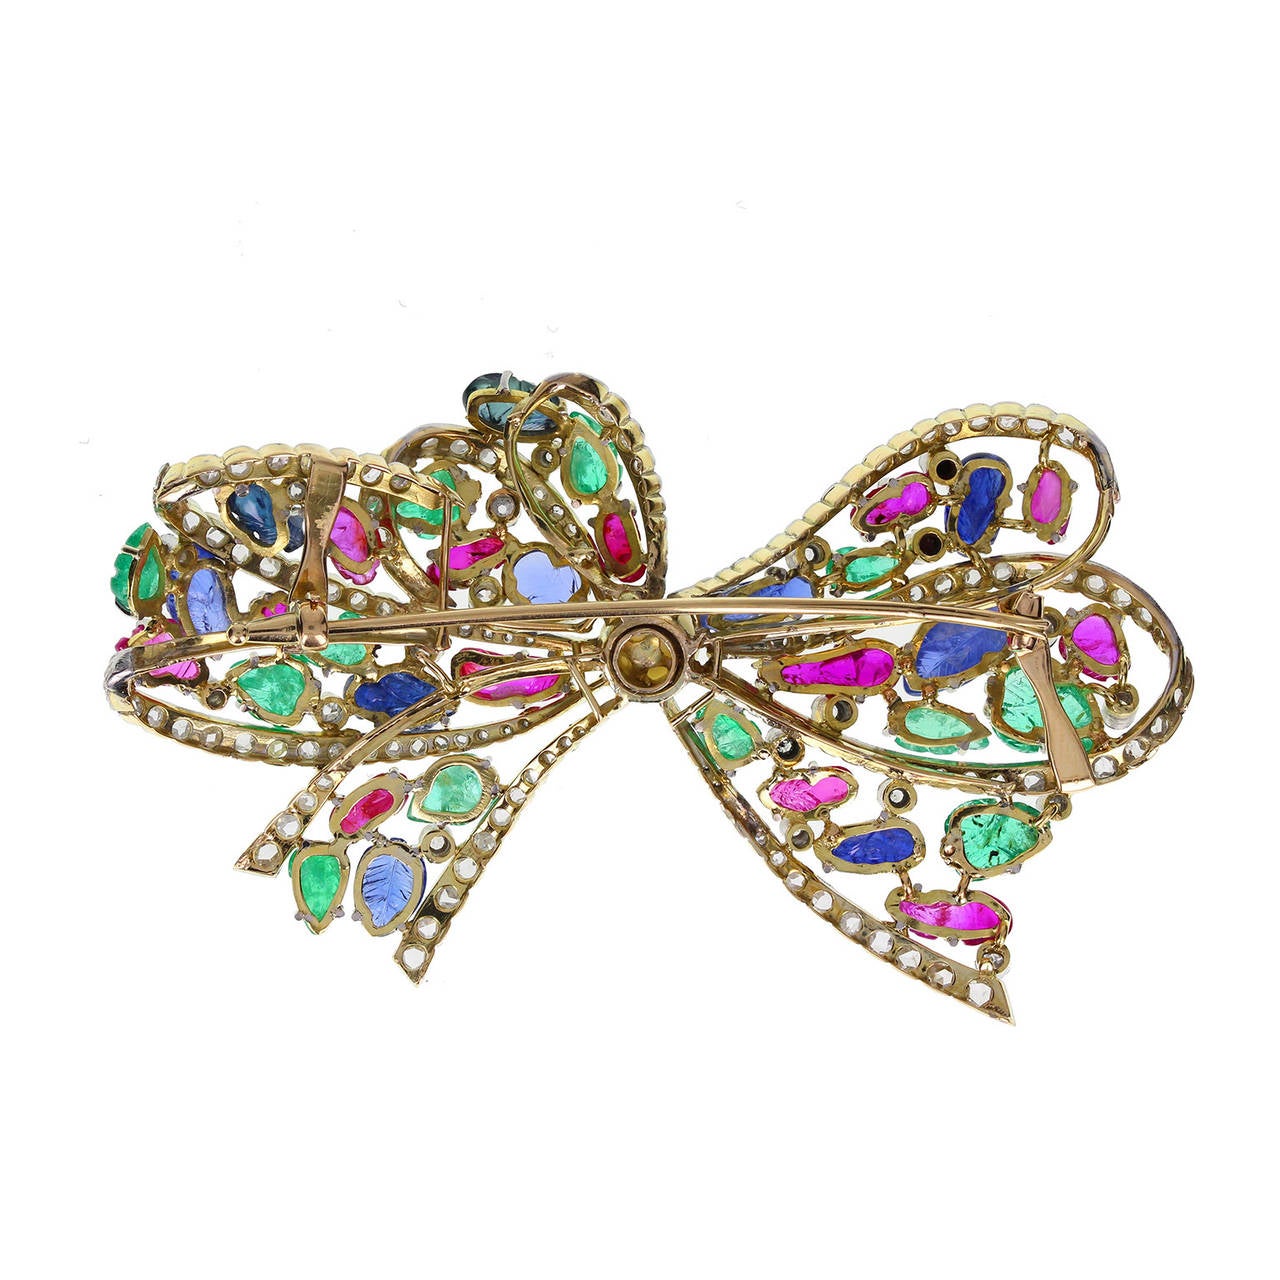 18 carat gold formed in the shaped of a lace bow with a single cultured pearl at the centre. Set with carved sapphires, rubies and emeralds with ribbons of mille grain set rose-cut diamonds. Exquisite quality and in excellent condition for the age.